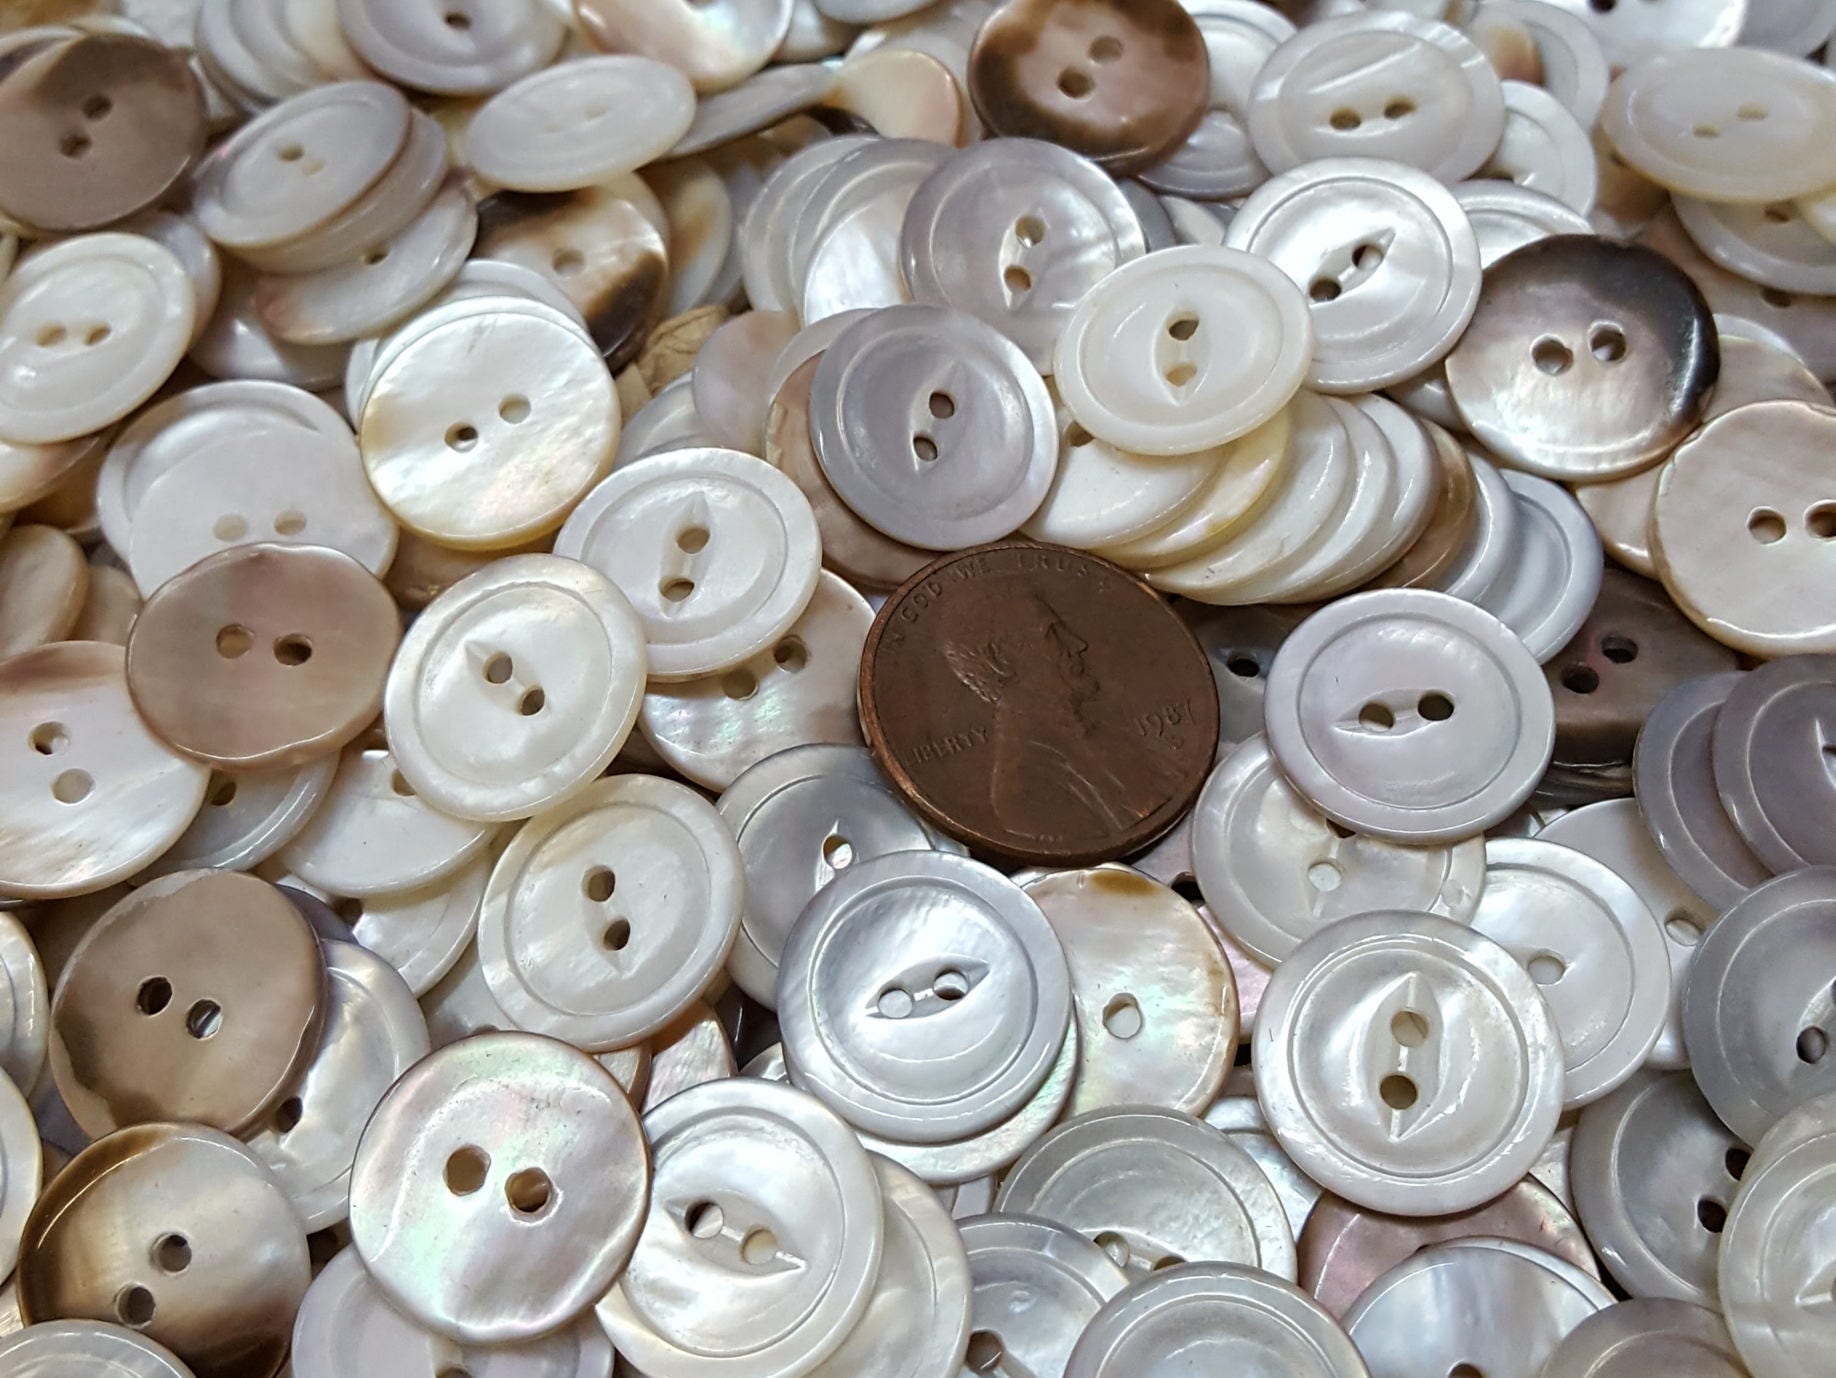 11MM Cool Vintage Pearlized Shiny Plastic White Buttons 